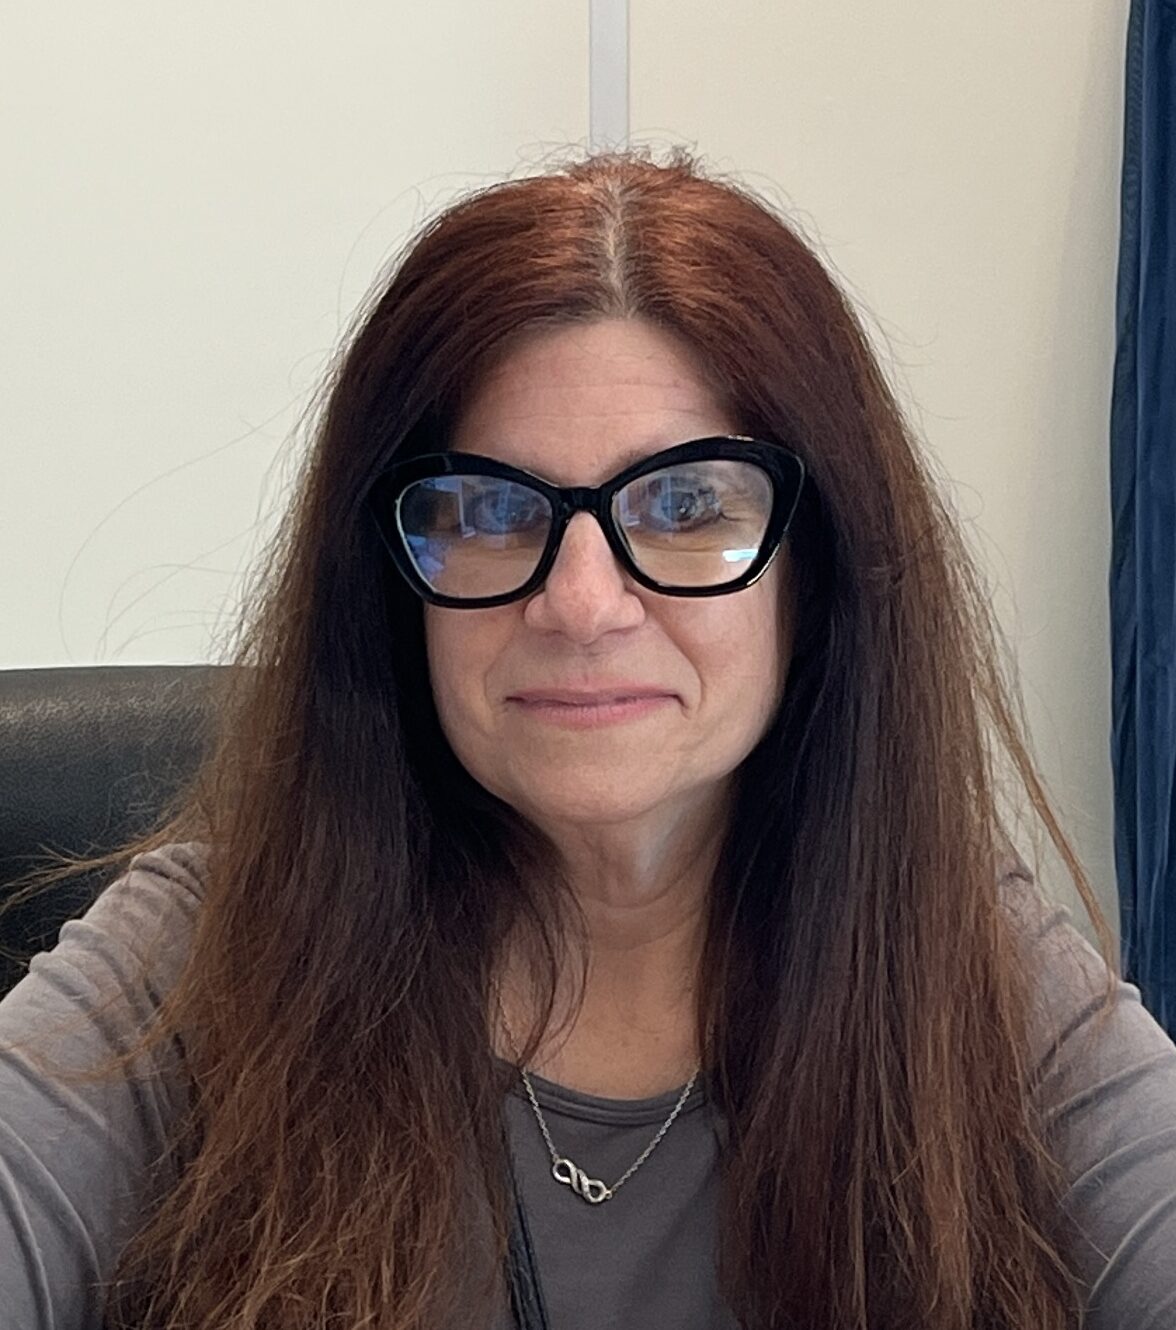 A picture of a woman wearing glasses